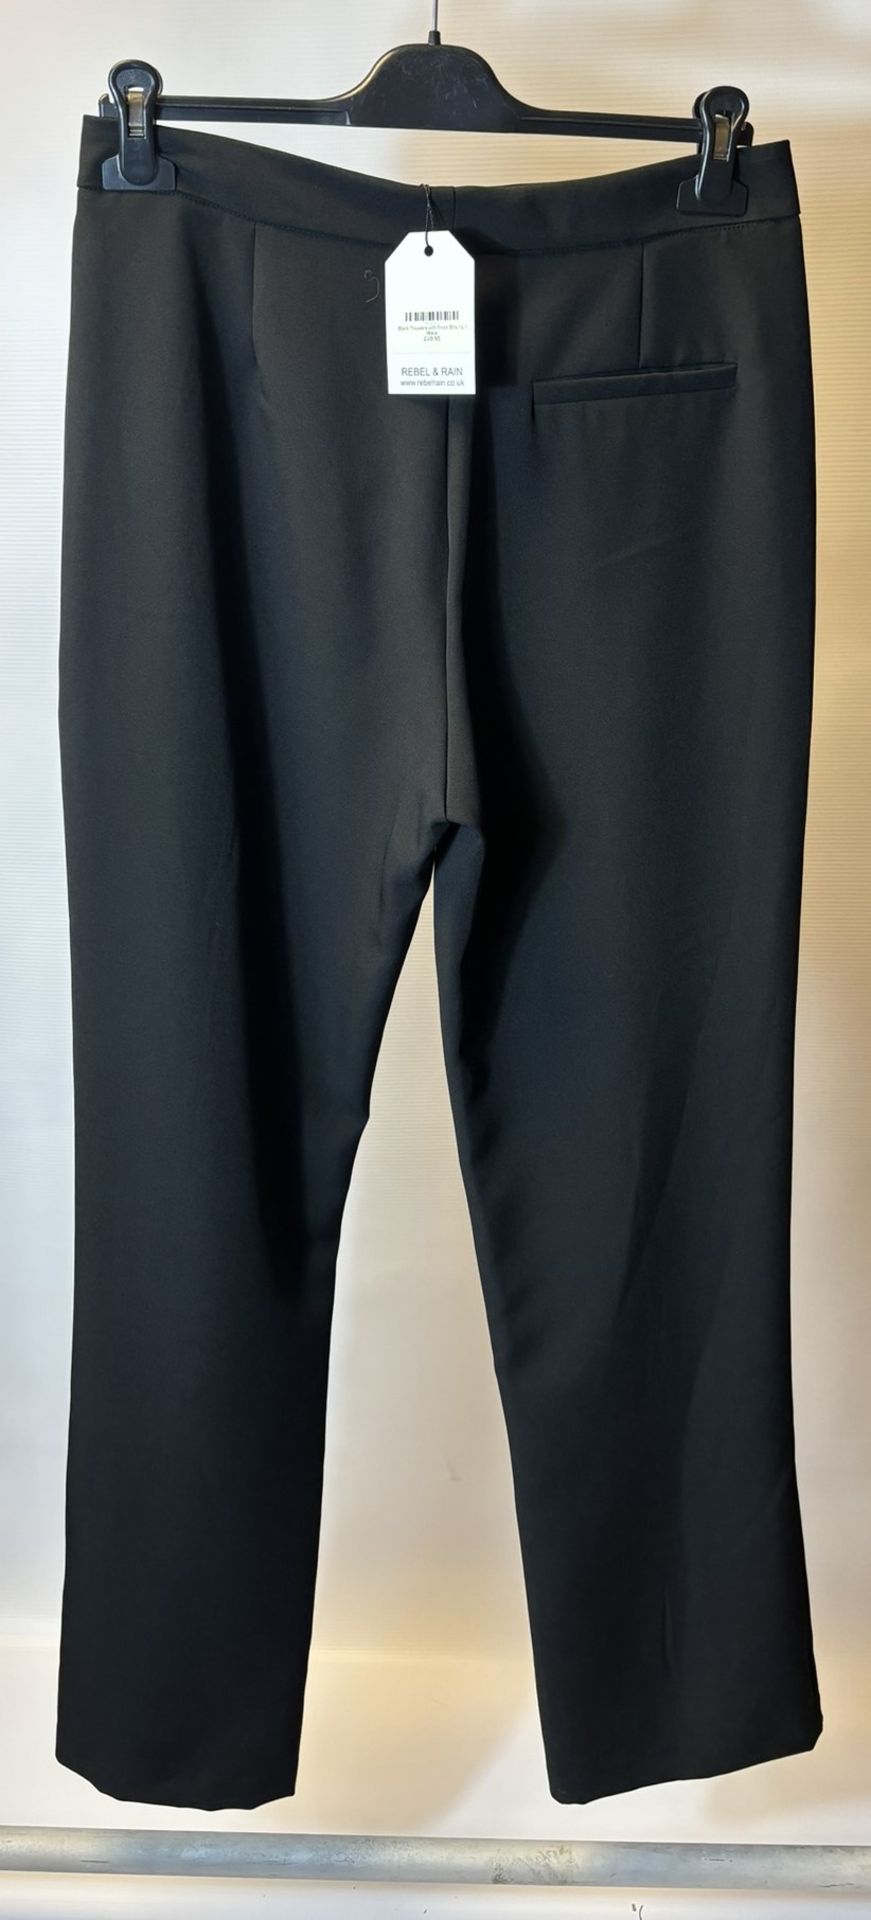 12 x Various Pairs Of Women's Trousers/Jeans As Seen In Photos - Image 29 of 36